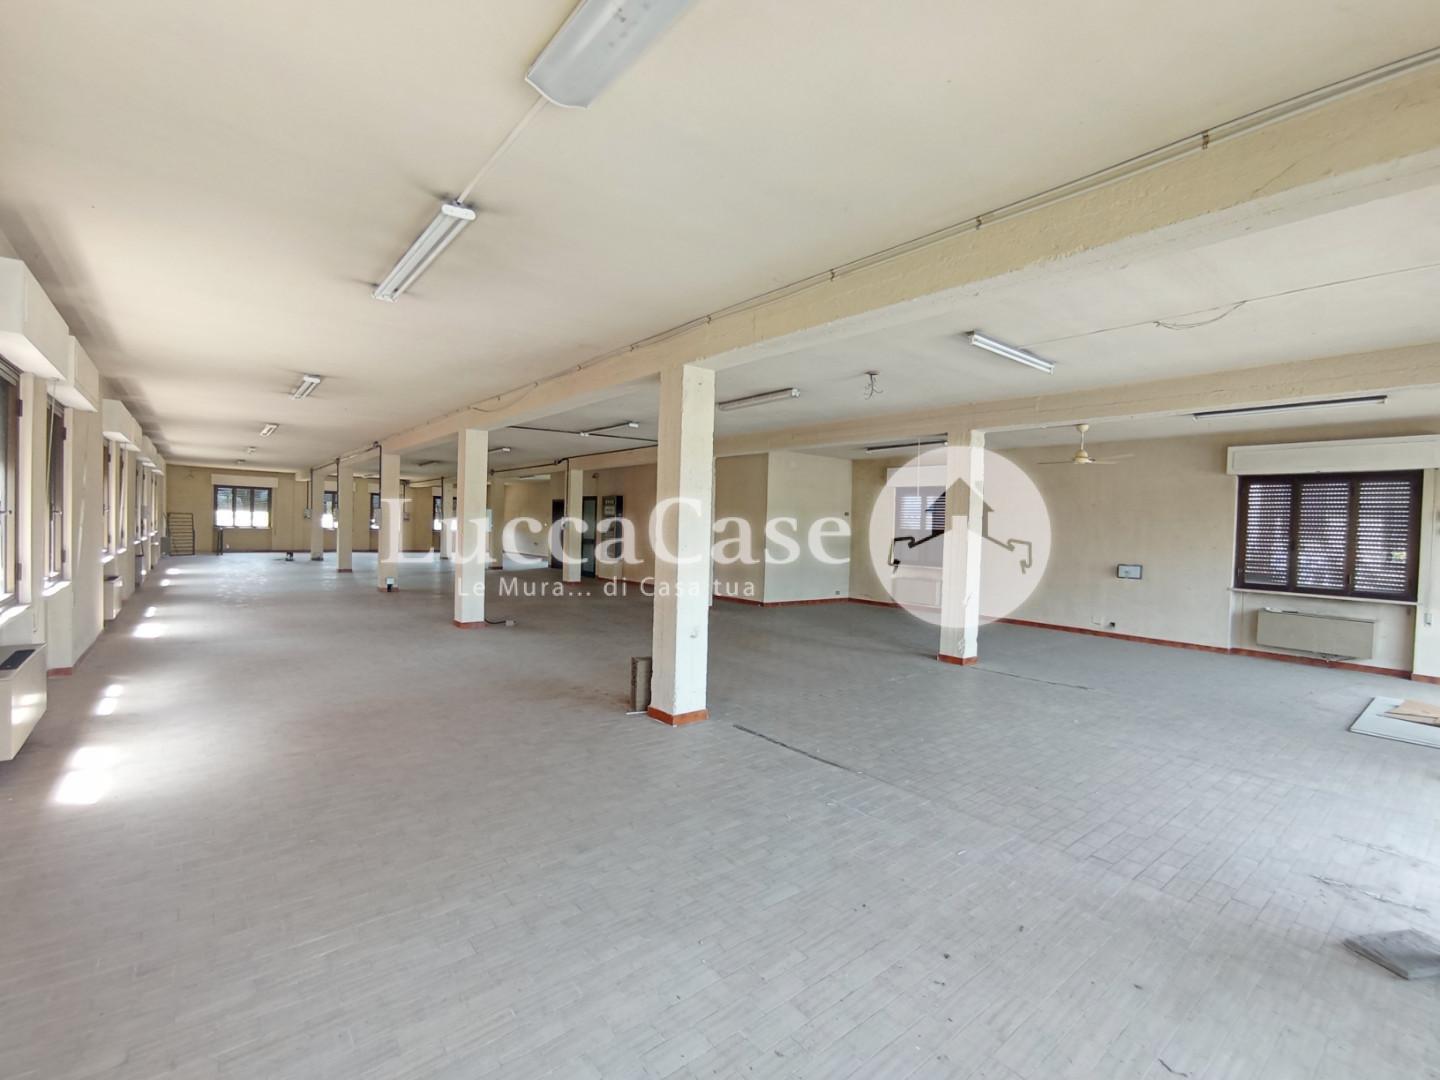 Business mall for commercial rentals in Capannori (LU)